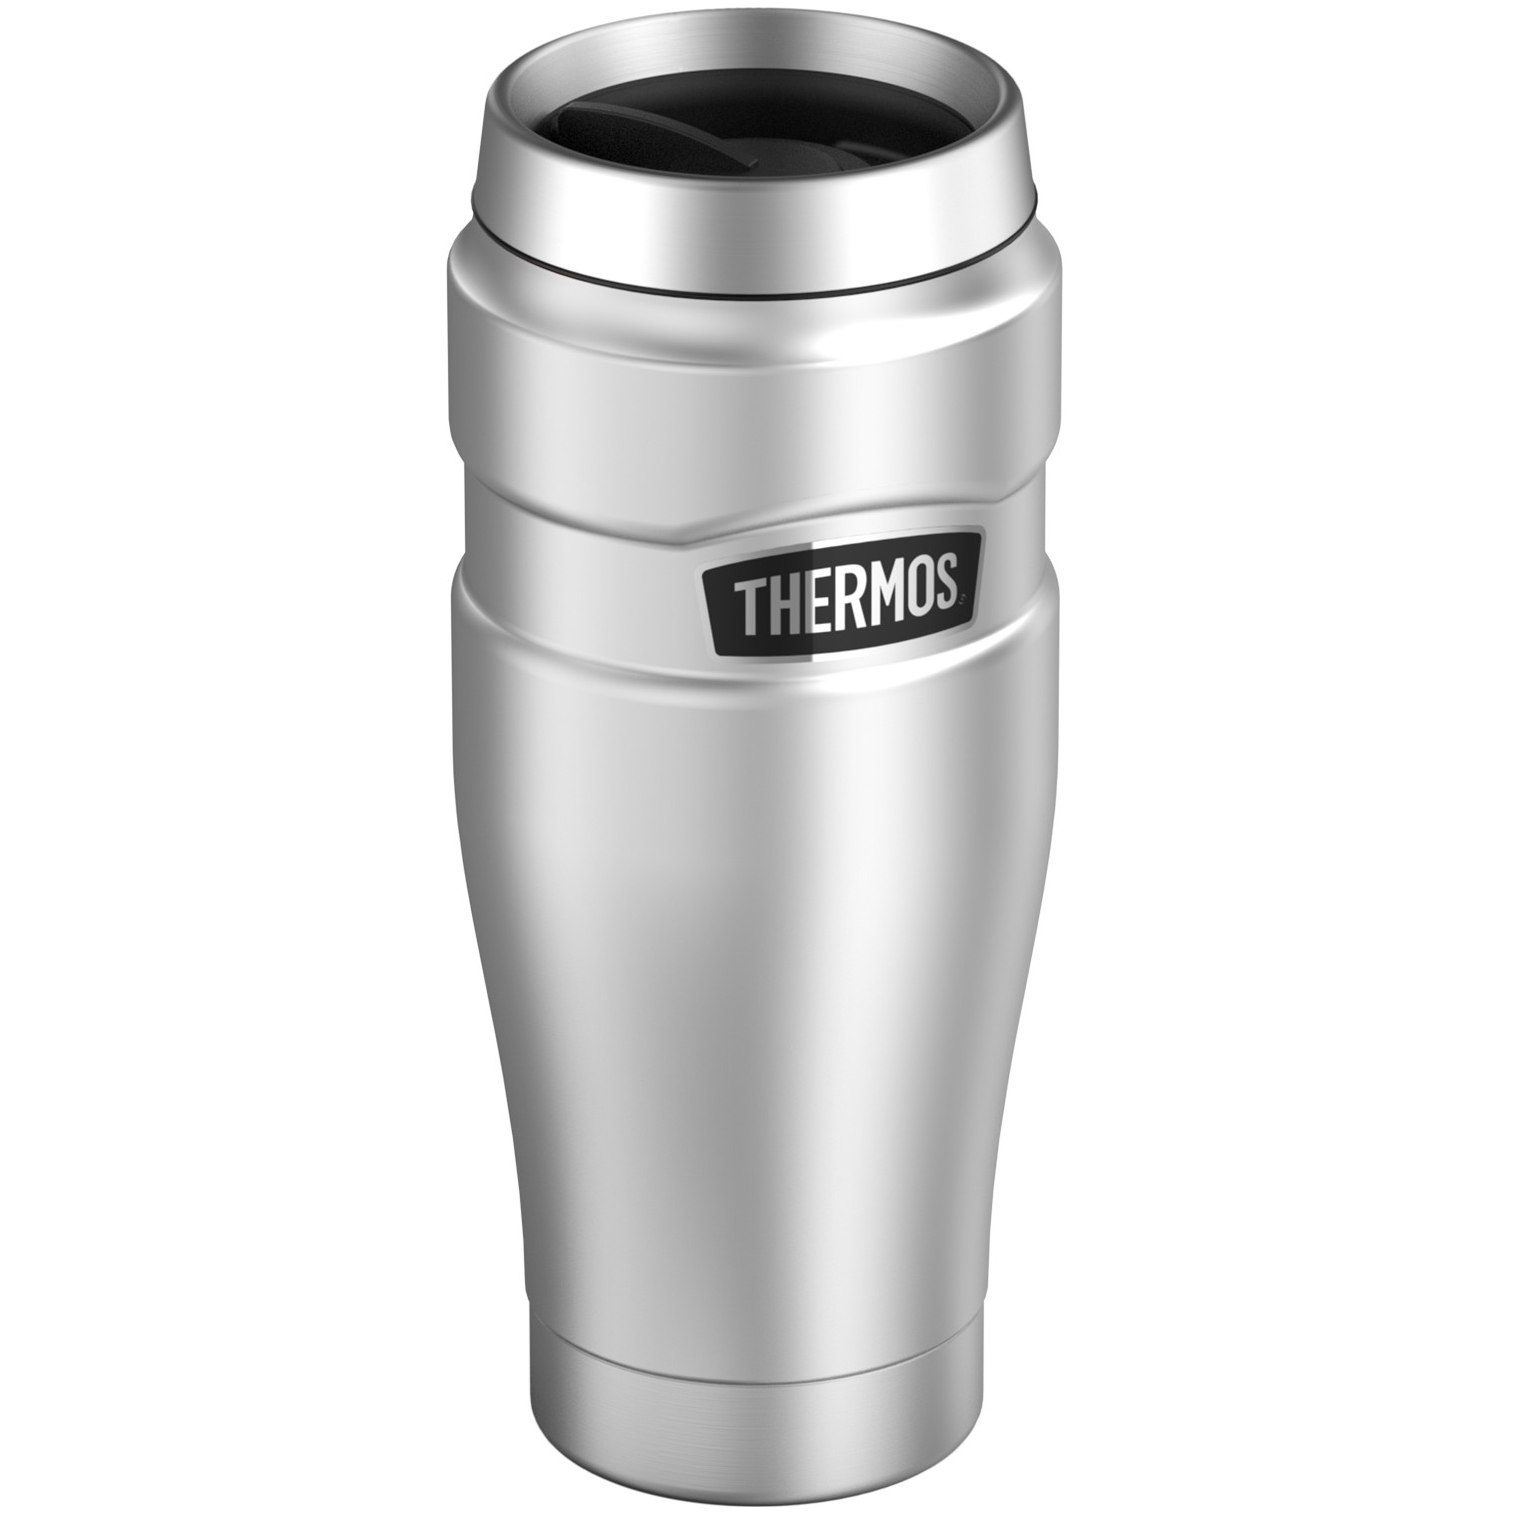 Productfoto van THERMOS® Stainless King Insulated Mug 0.47L - stainless steel matt